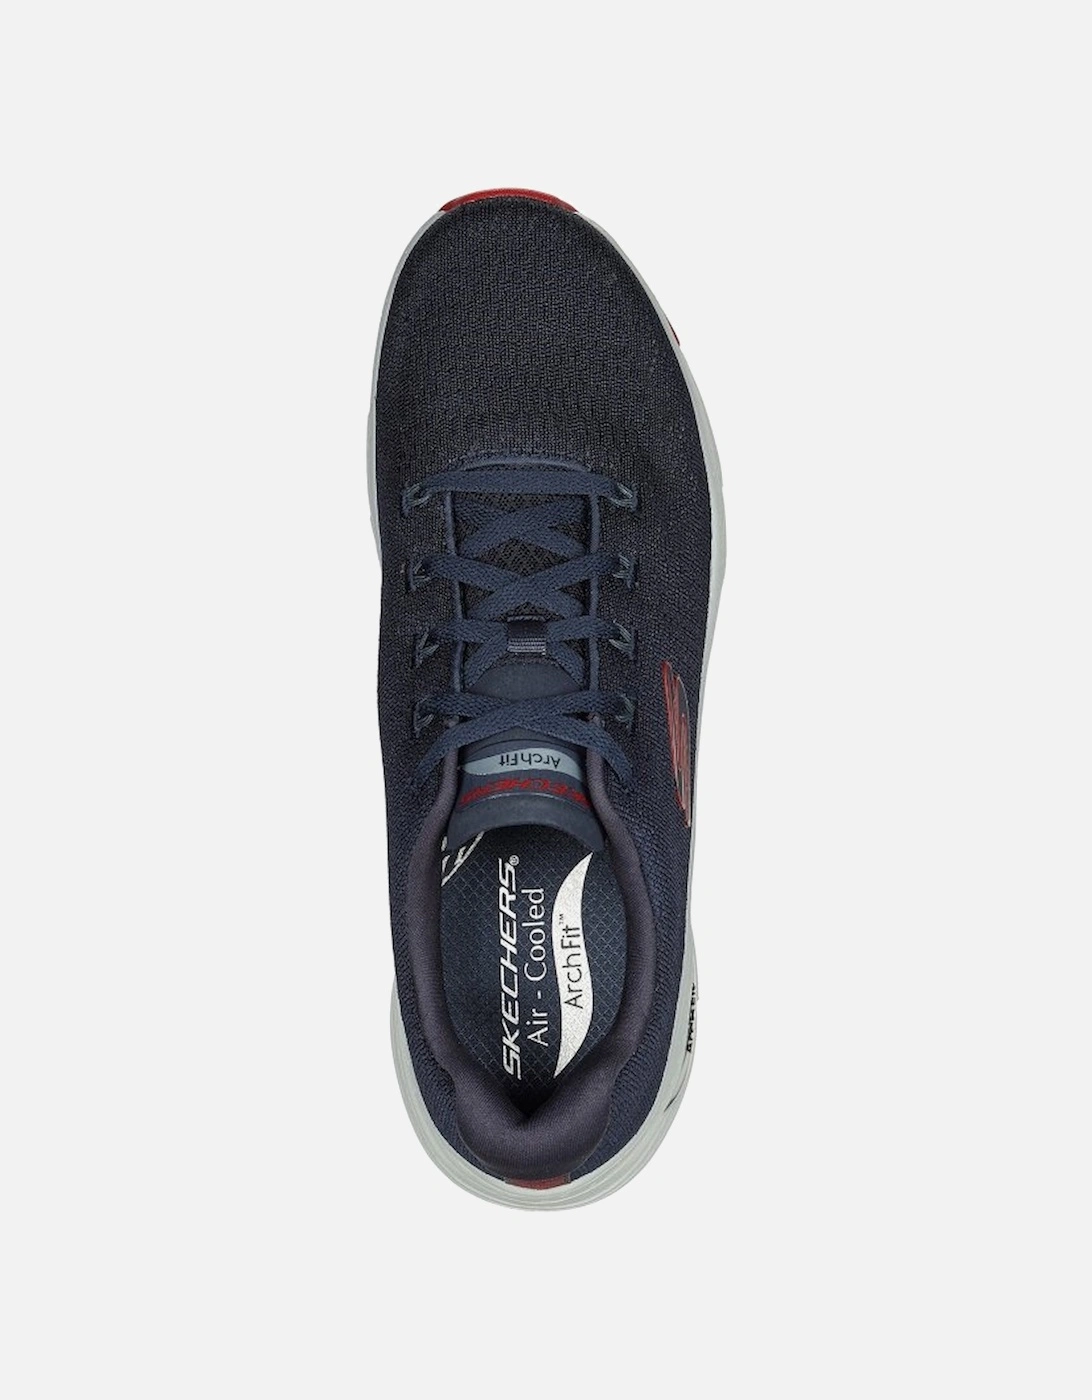 Arch Fit Takar Mens Trainers